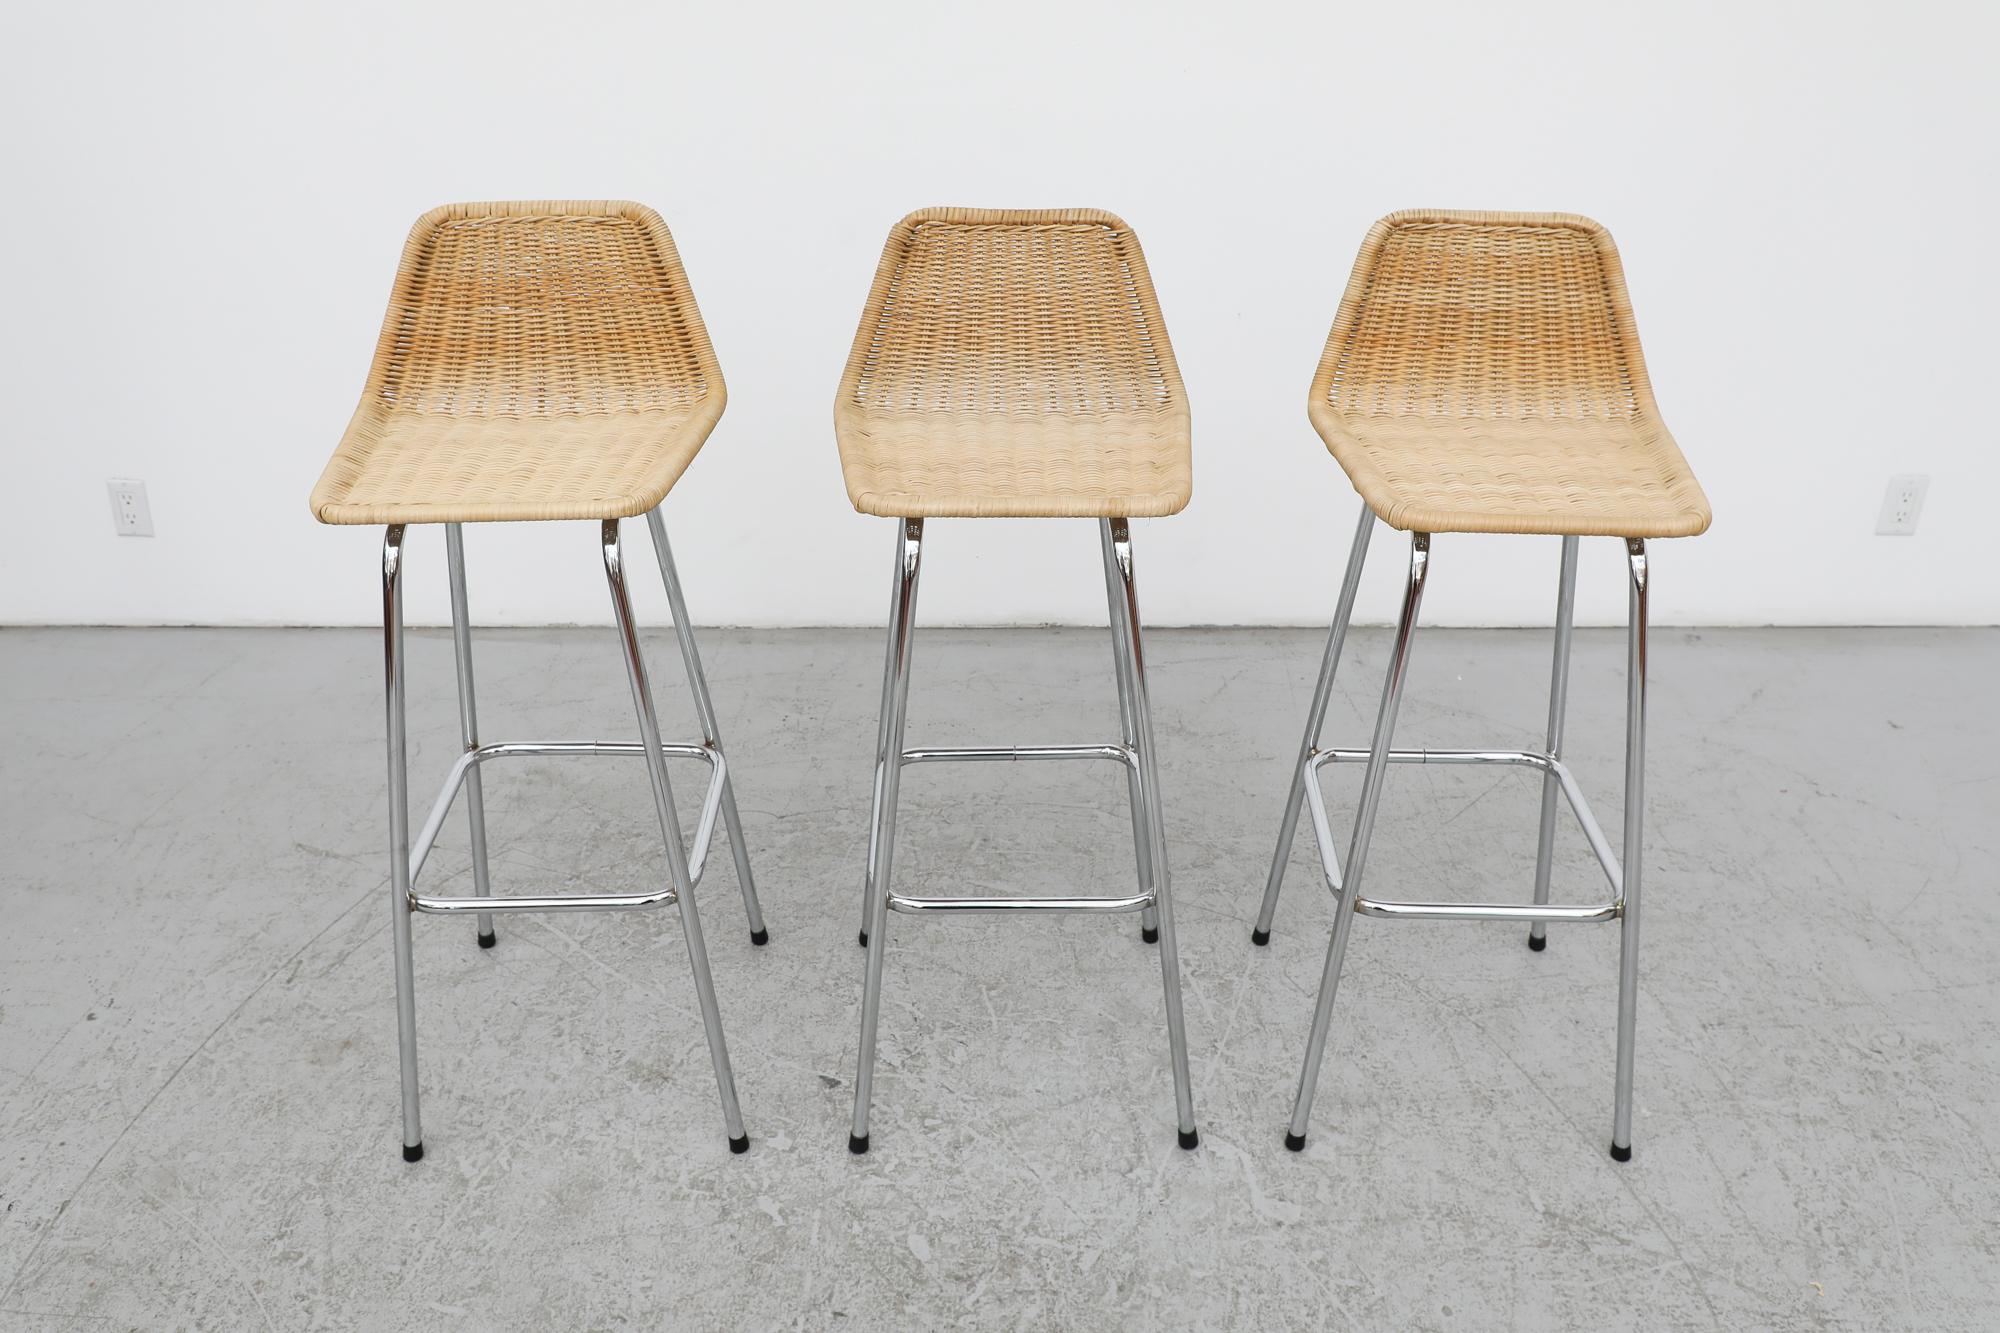 Mid-20th Century Charlotte Perriand Style Wicker Extra Tall Bar Stools With Angled Back